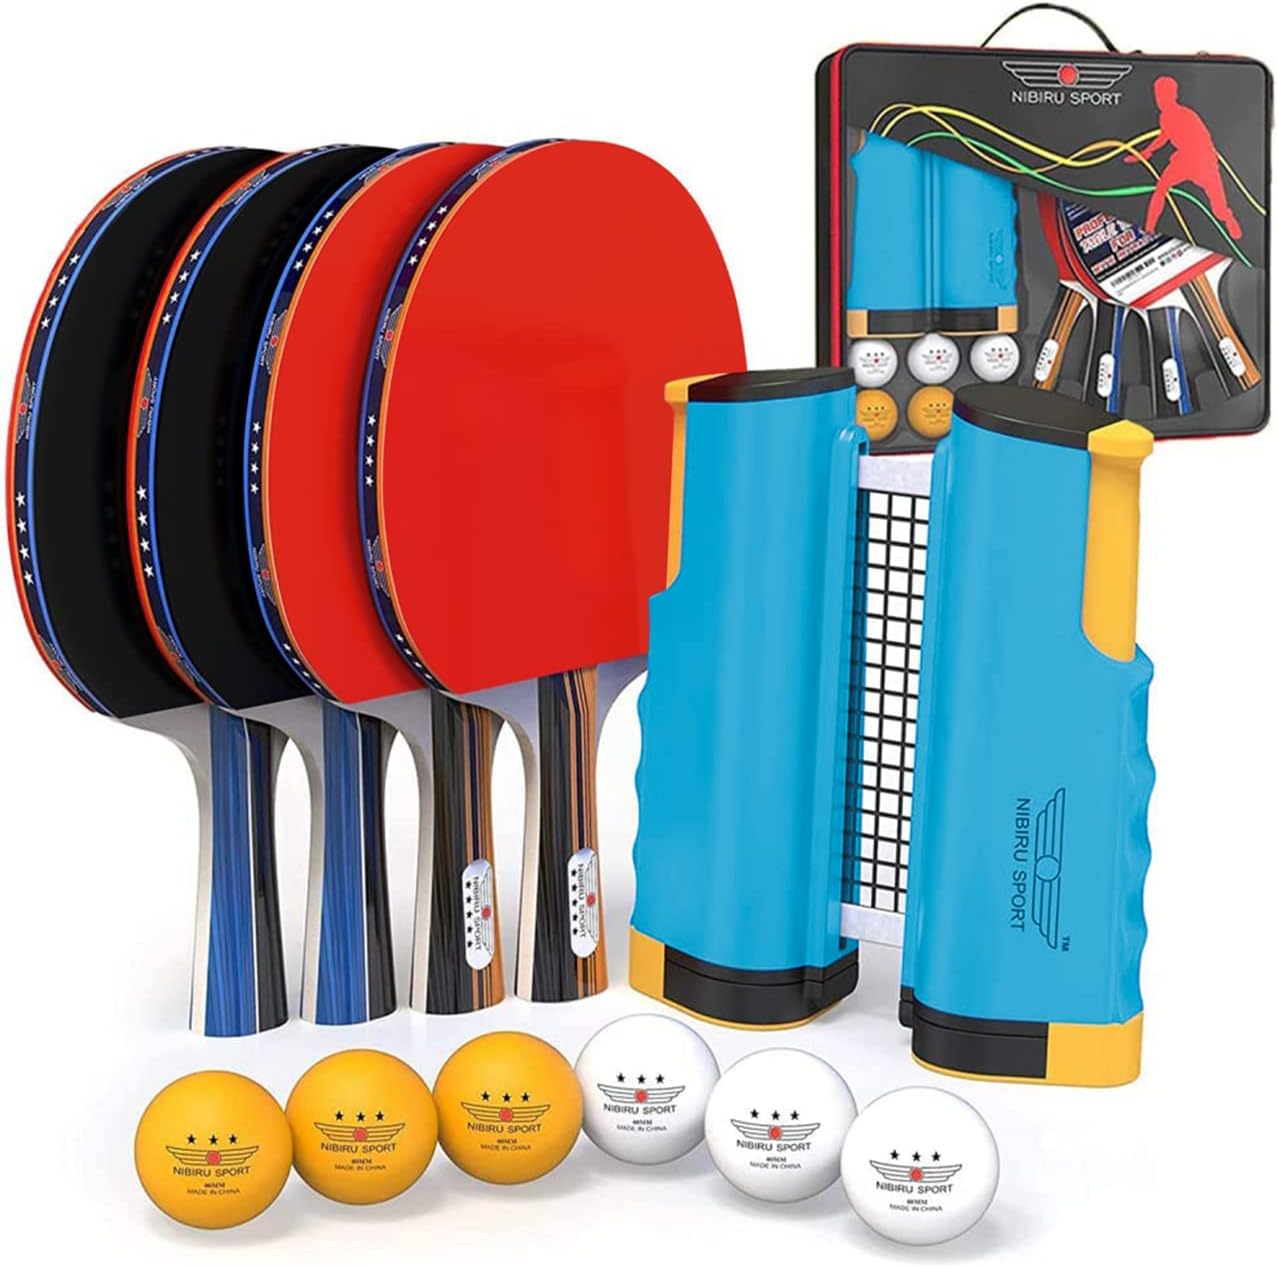 Portable Table Tennis Complete Game Set Retractable Net Paddles Balls Posts 